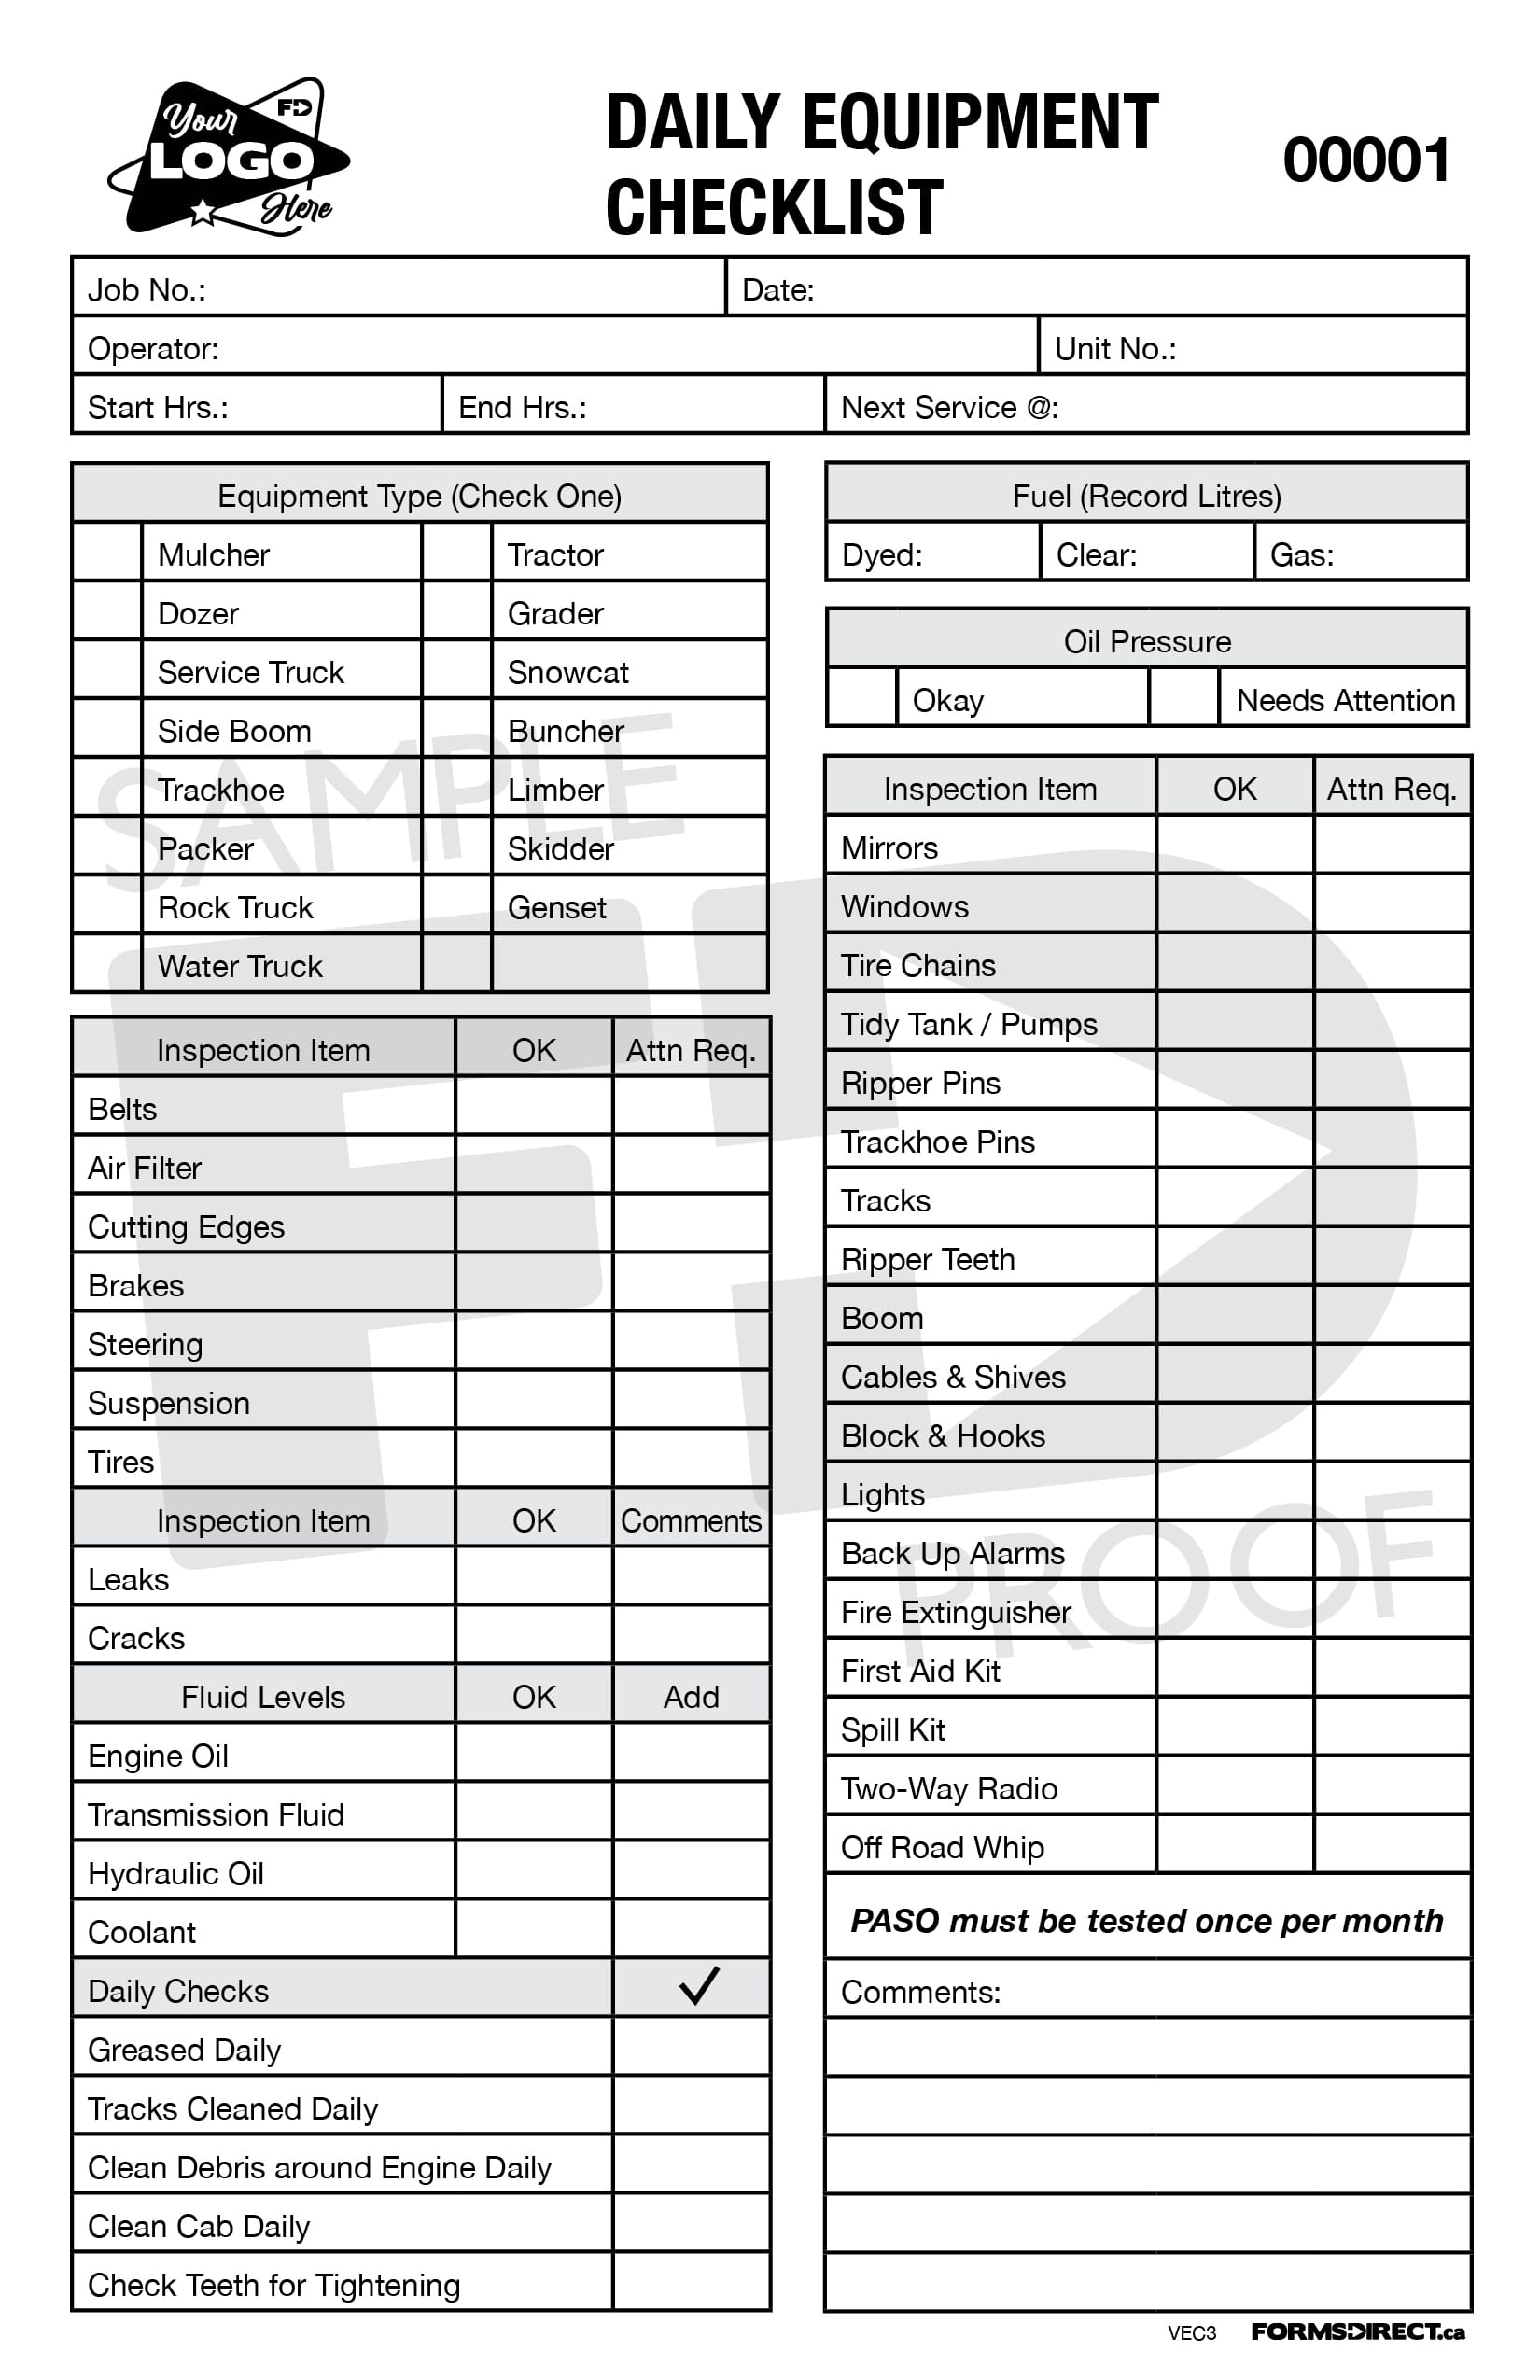 Daily Equipment Checklist VEC3 Customizable Template Forms Direct